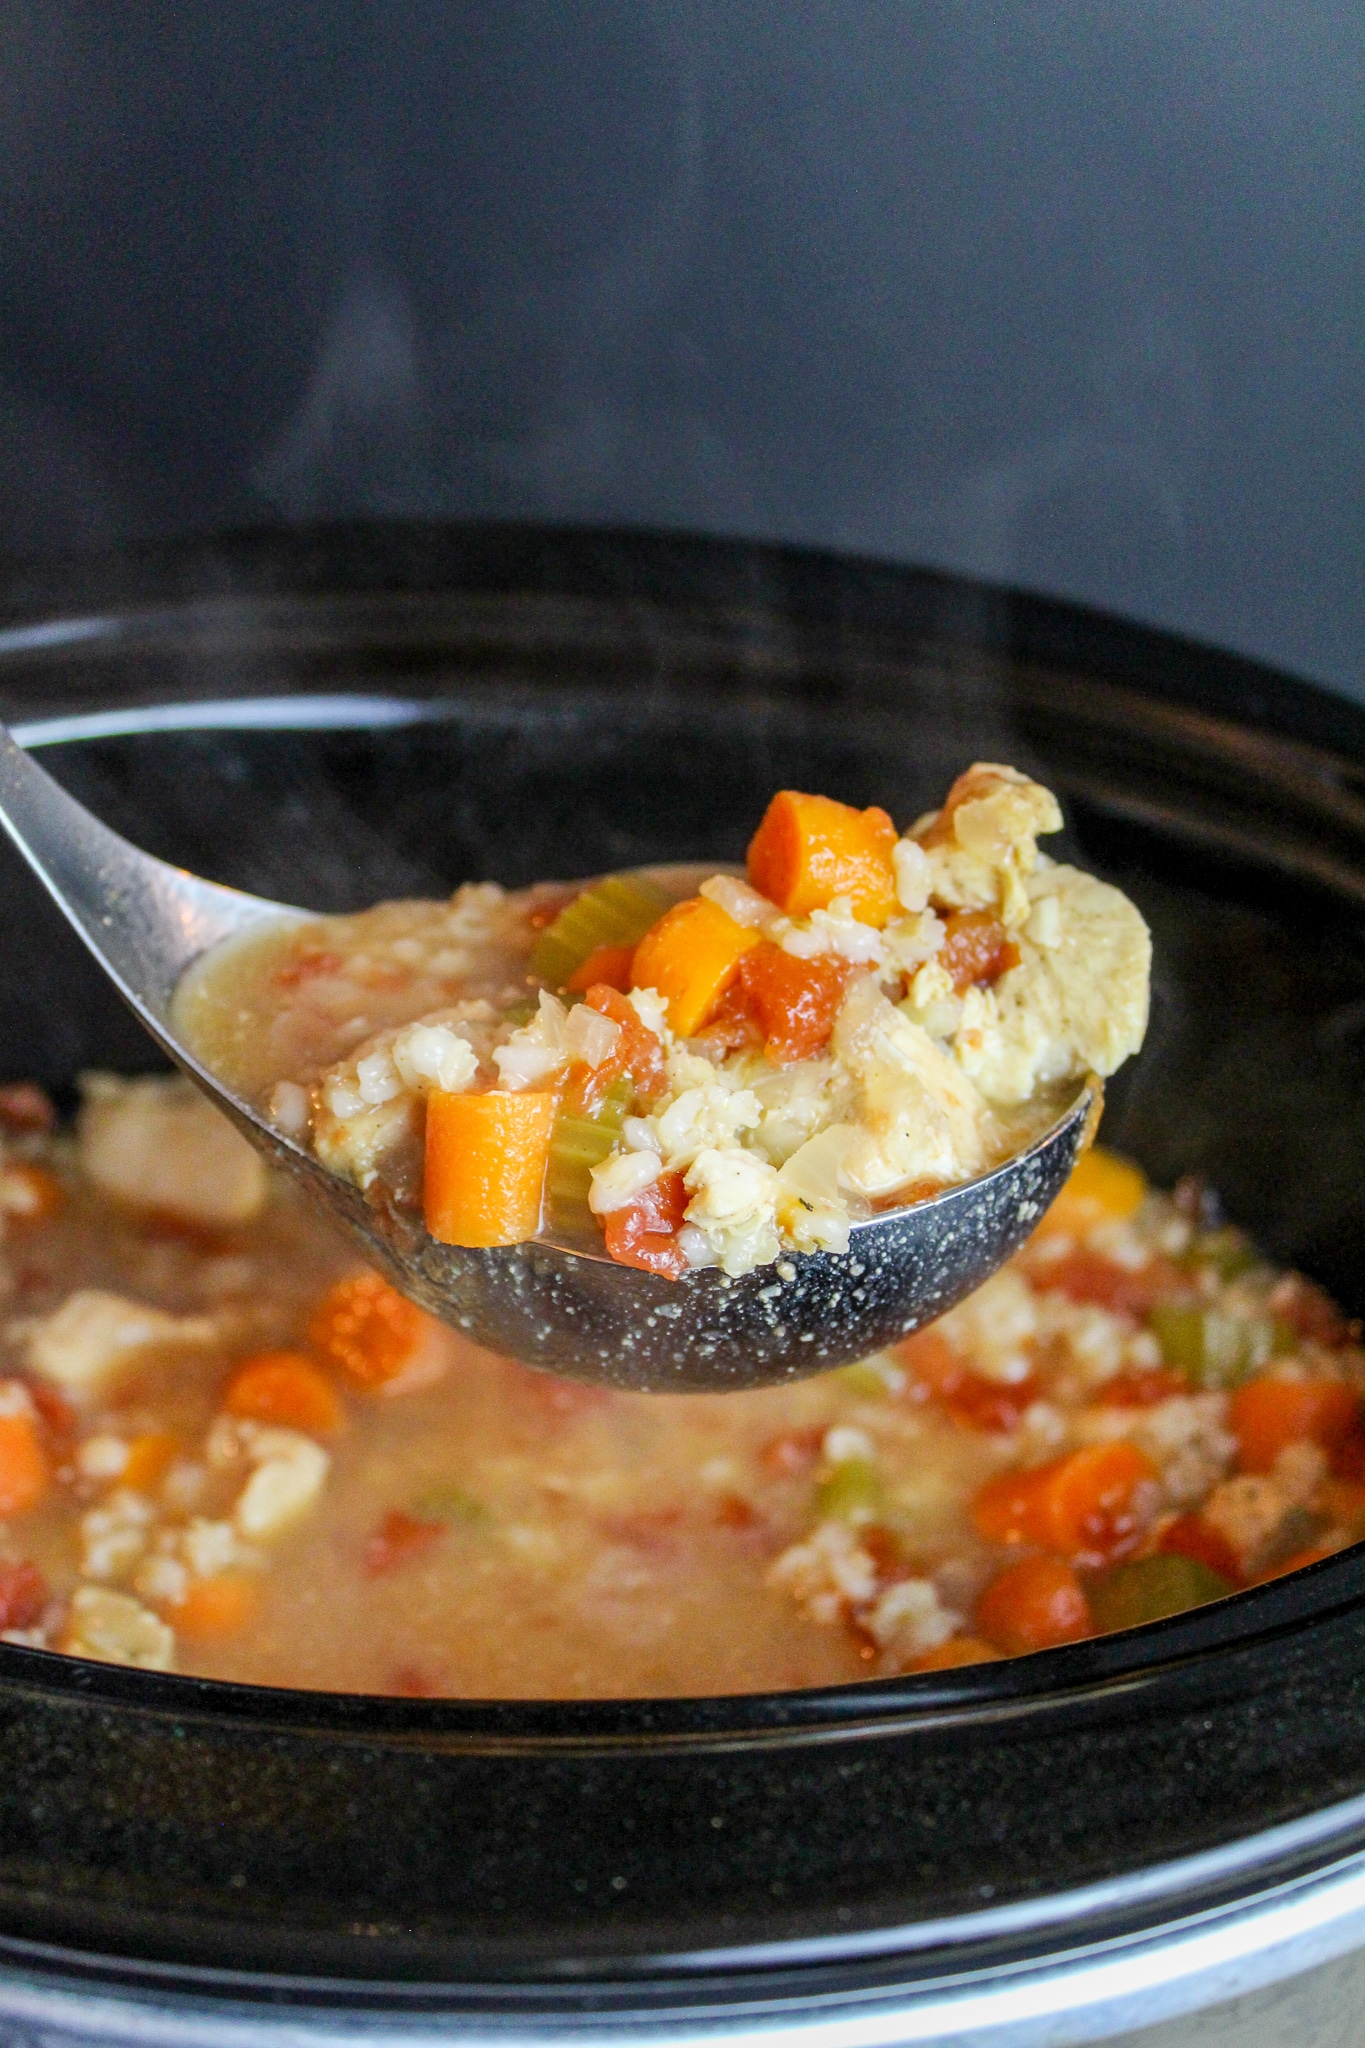 soup scooped from the slow cooker